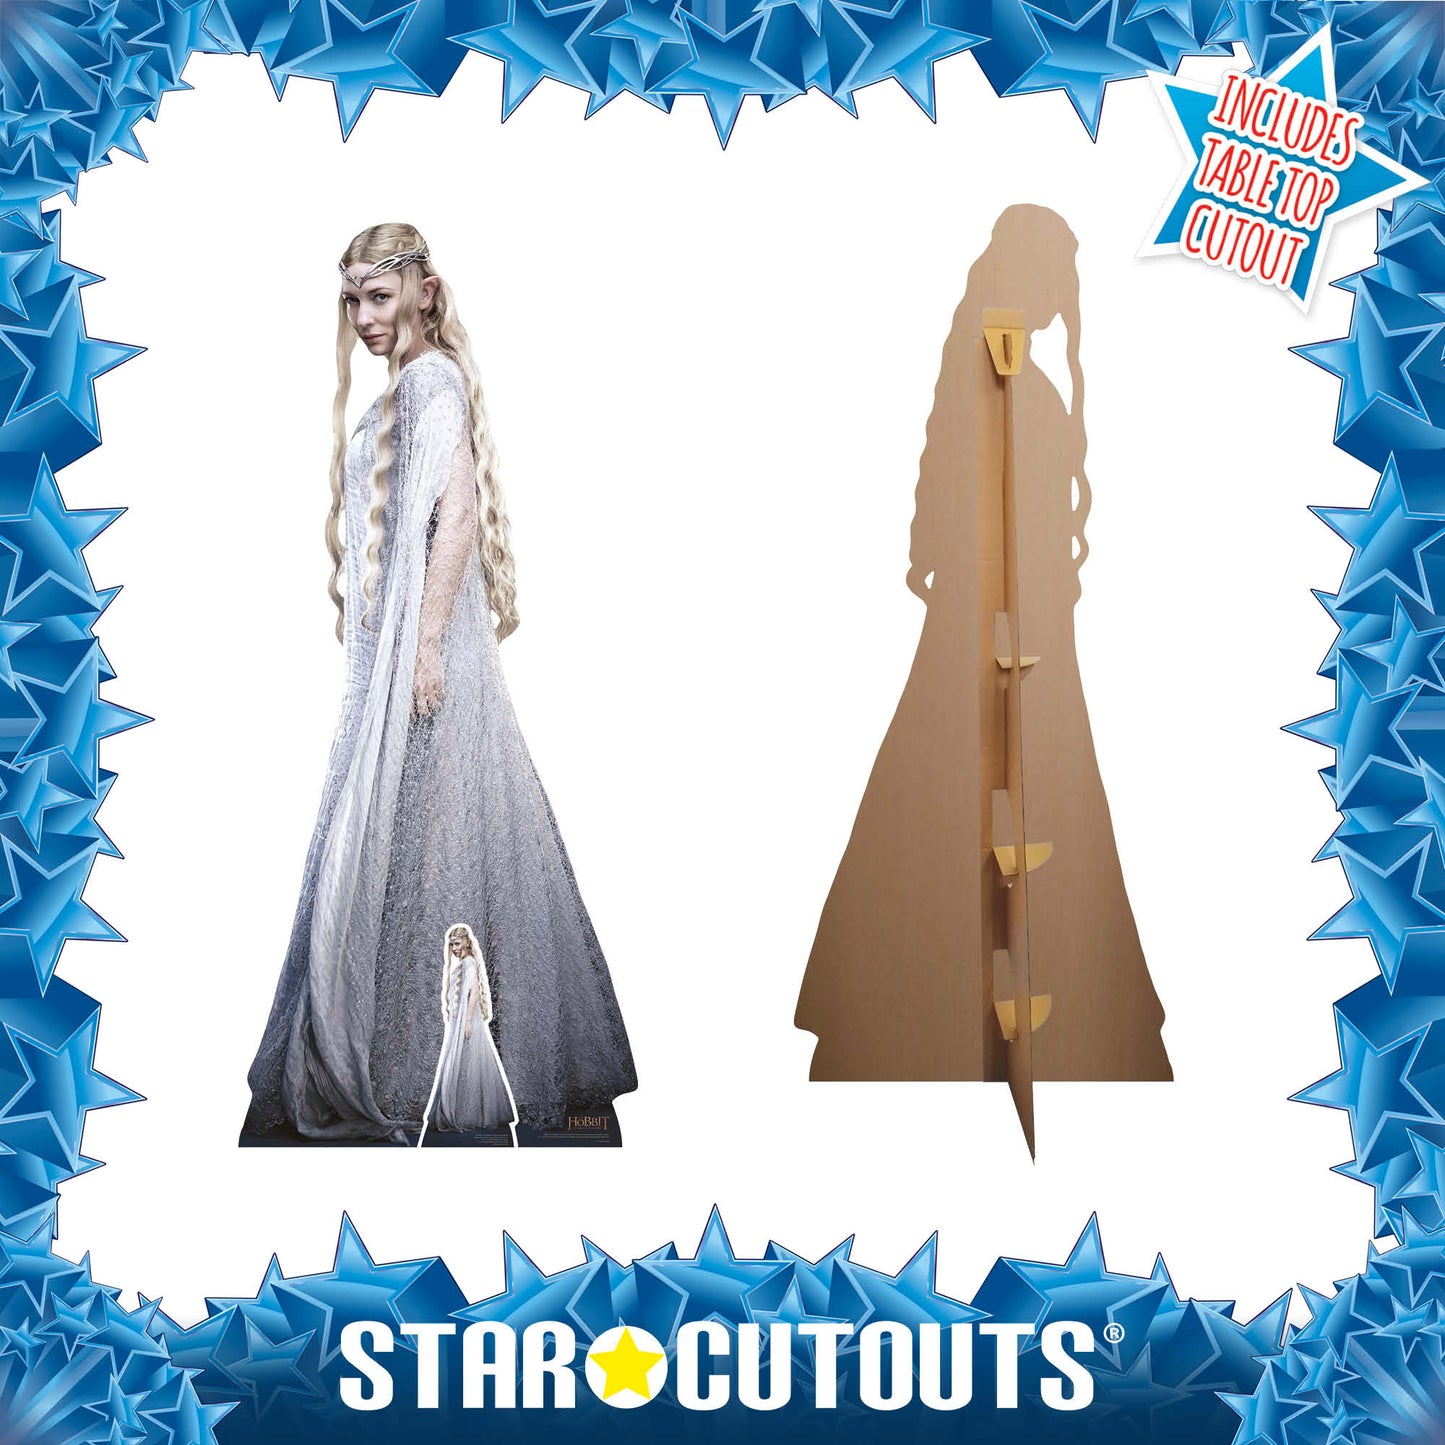 SC4137 Galadriel Hobbits Movies Cardboard Cut Out Height 194cm